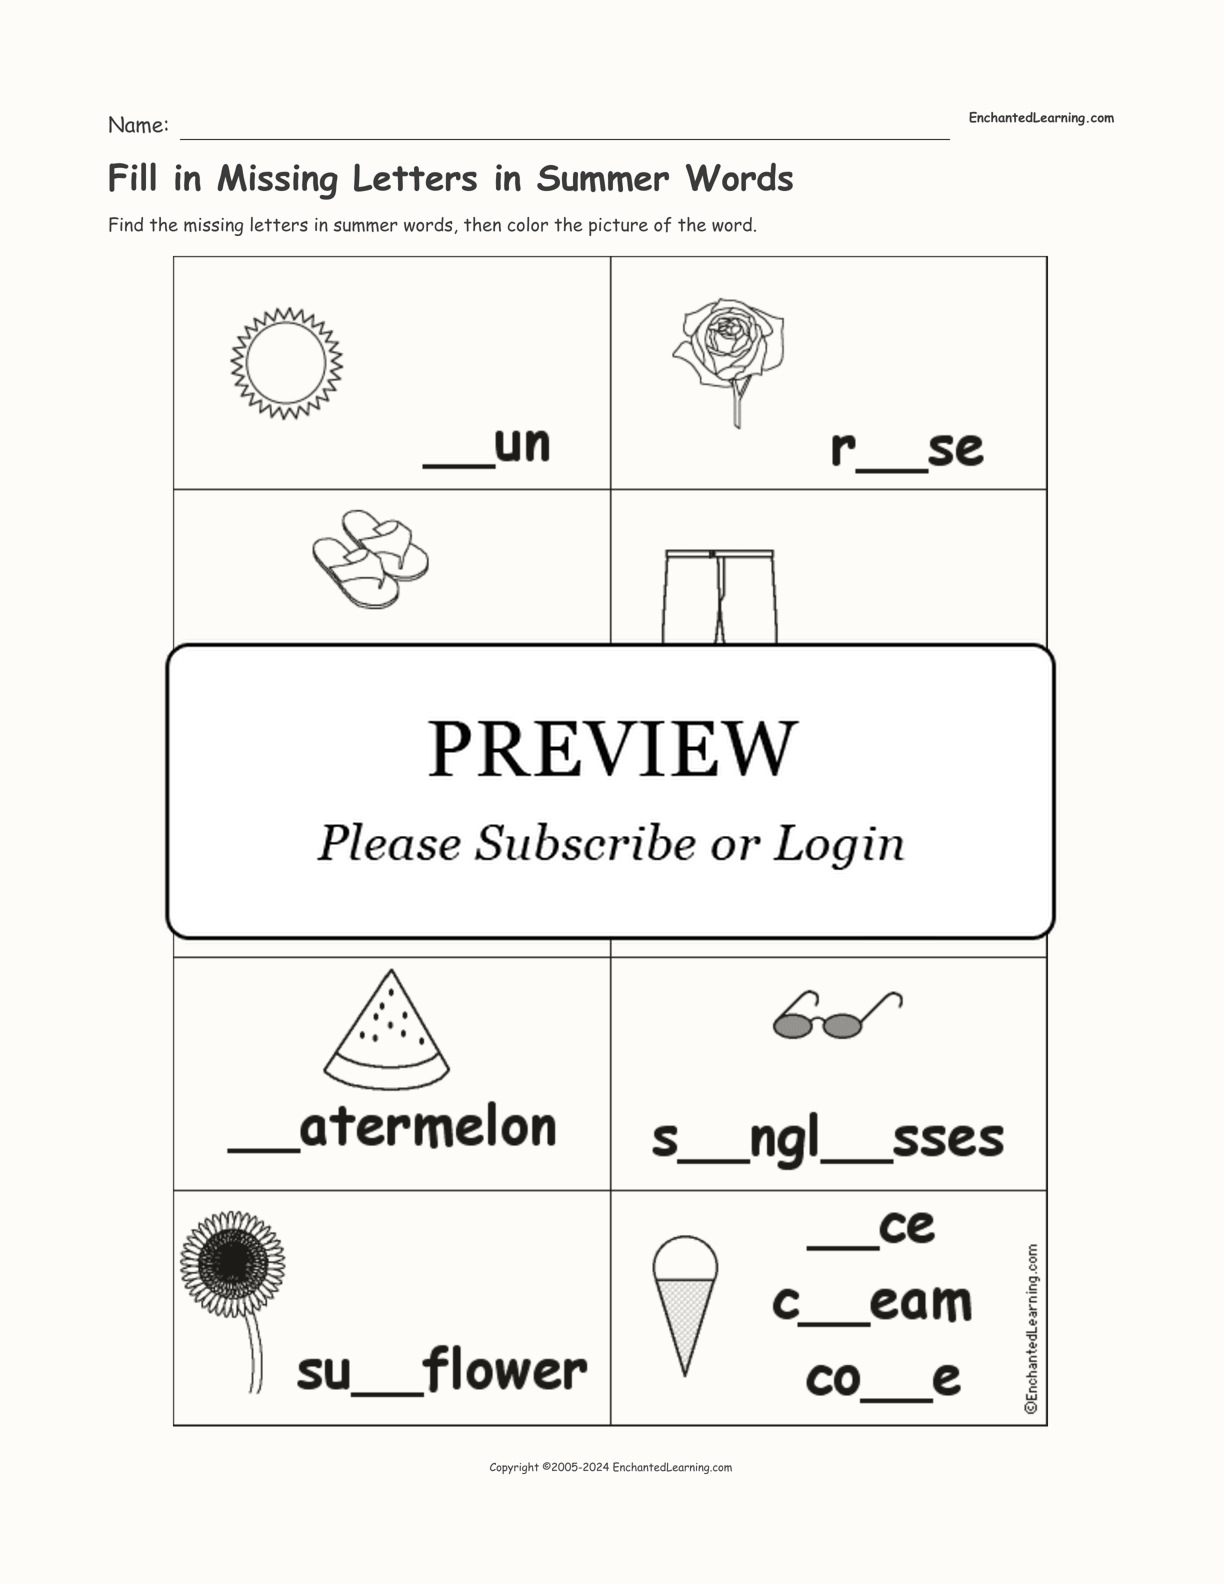 Fill in Missing Letters in Summer Words interactive worksheet page 1